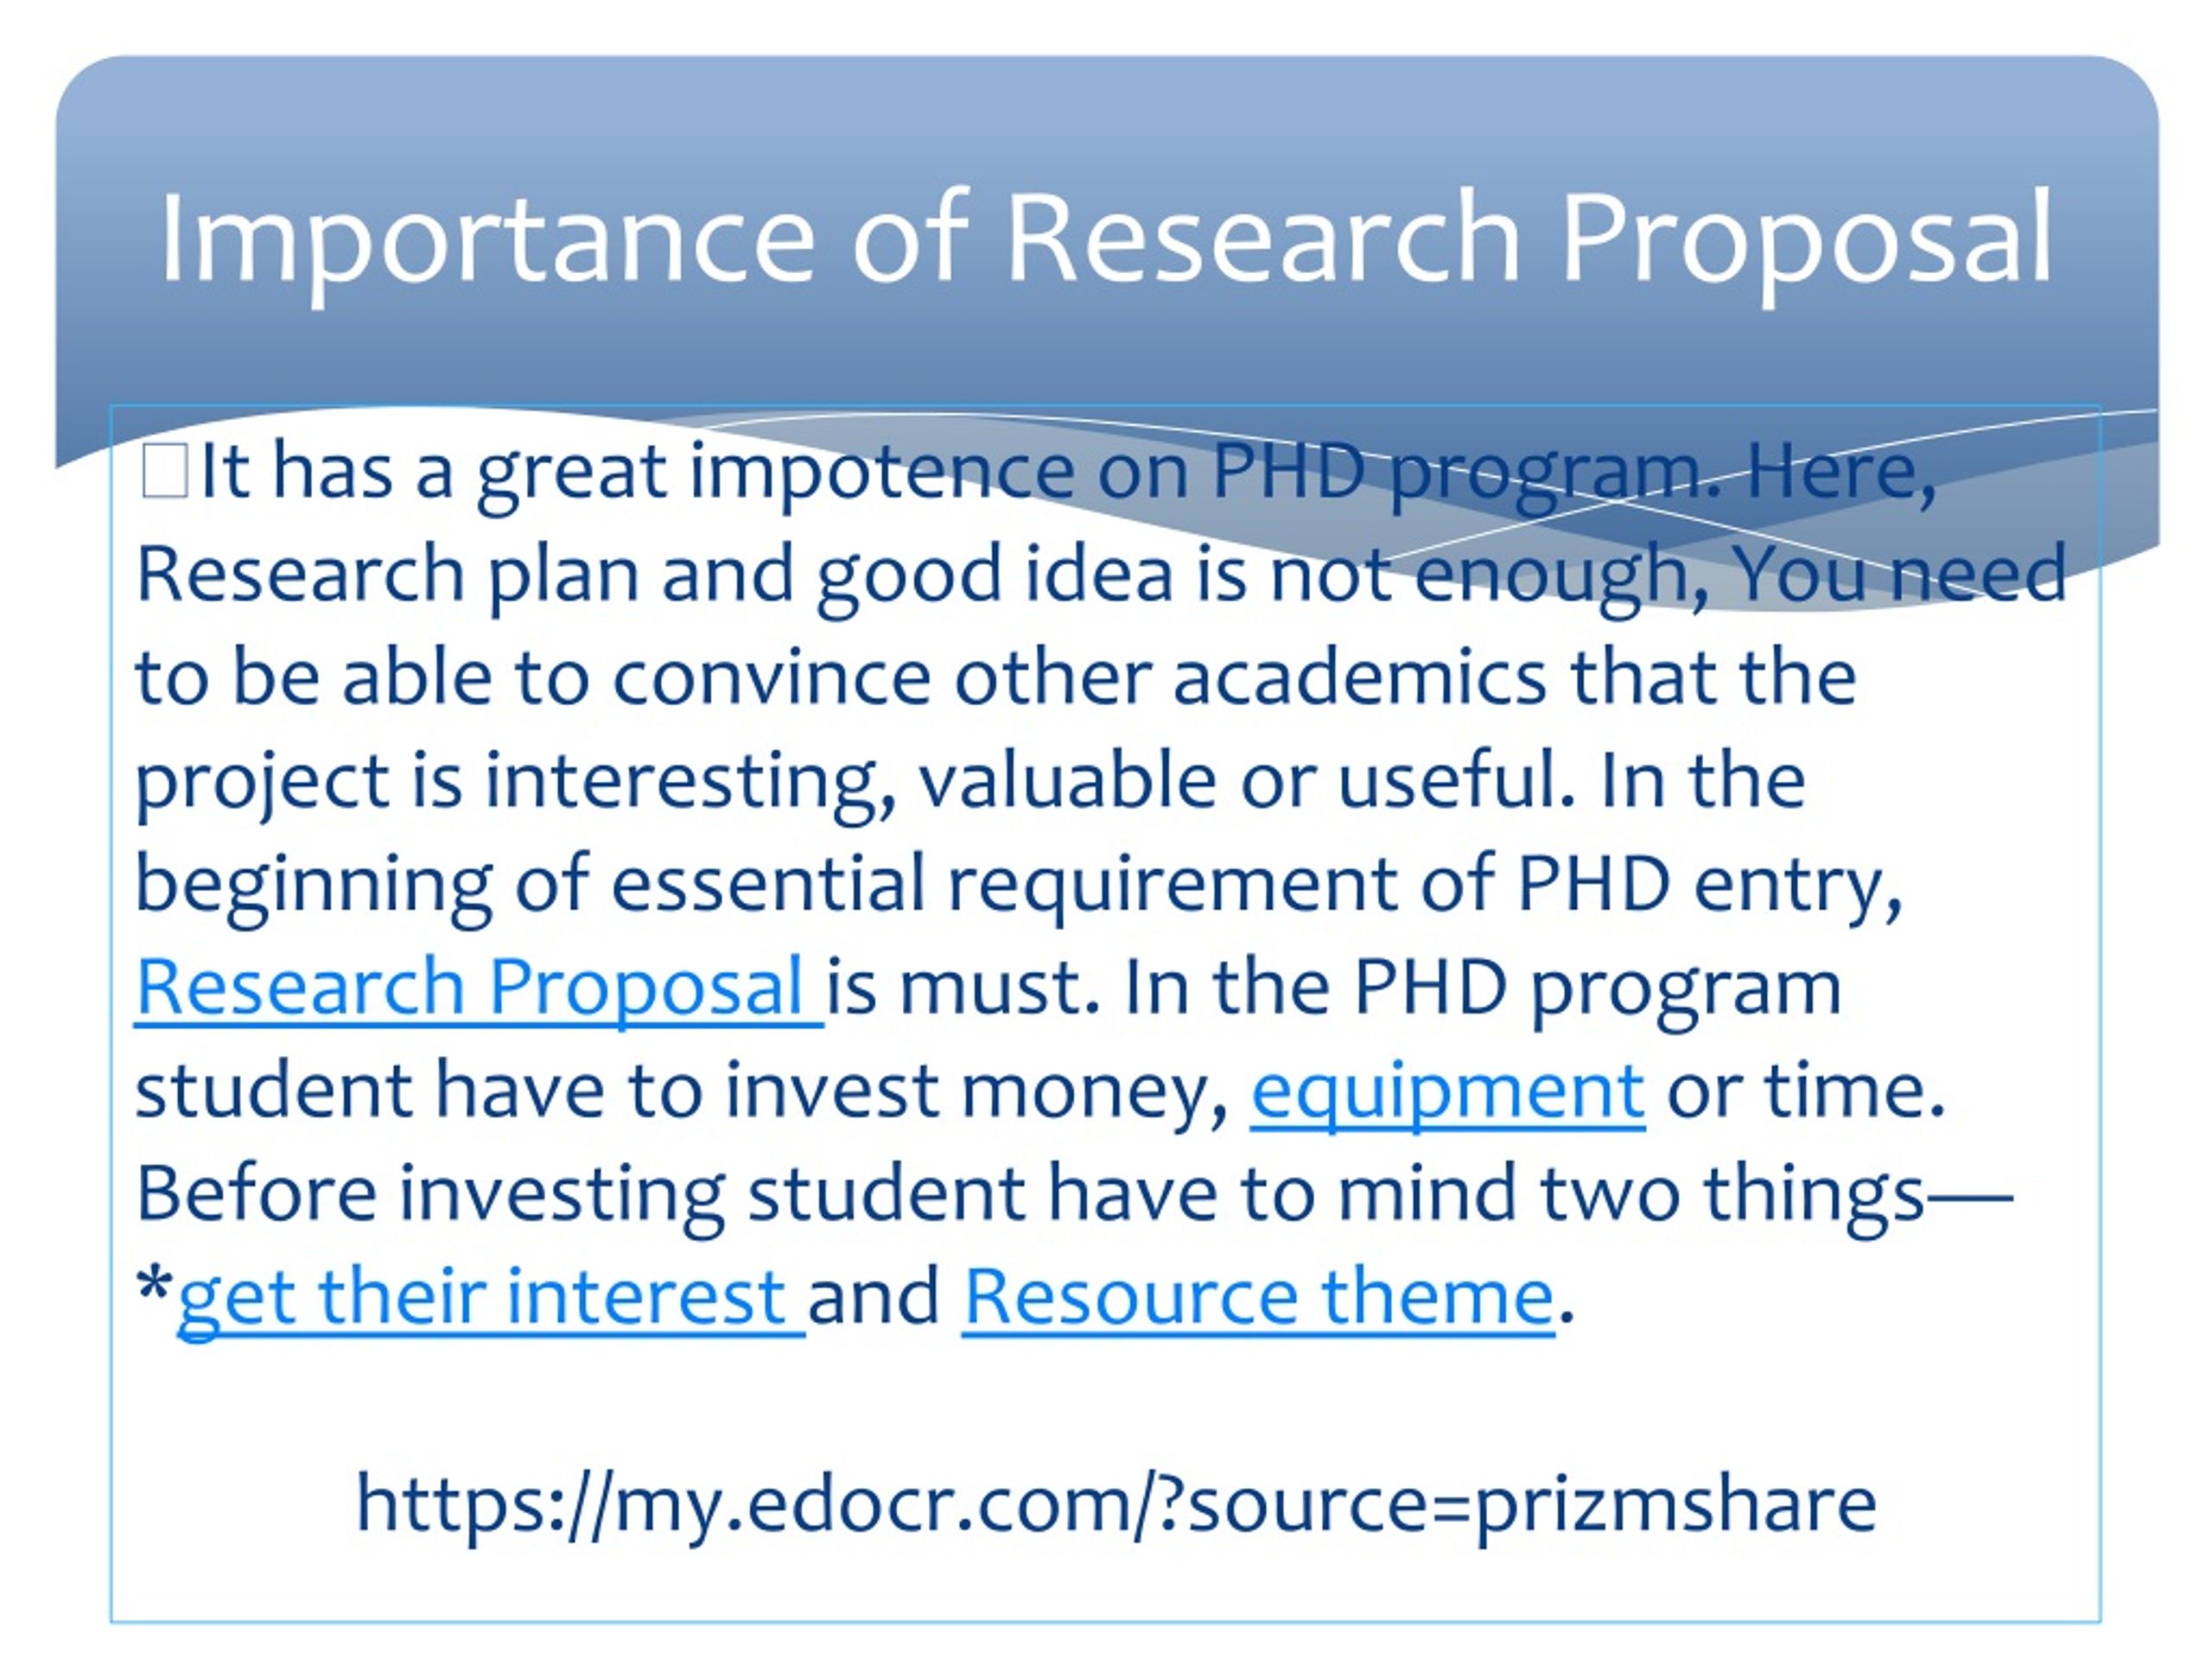 a research proposal is defined as